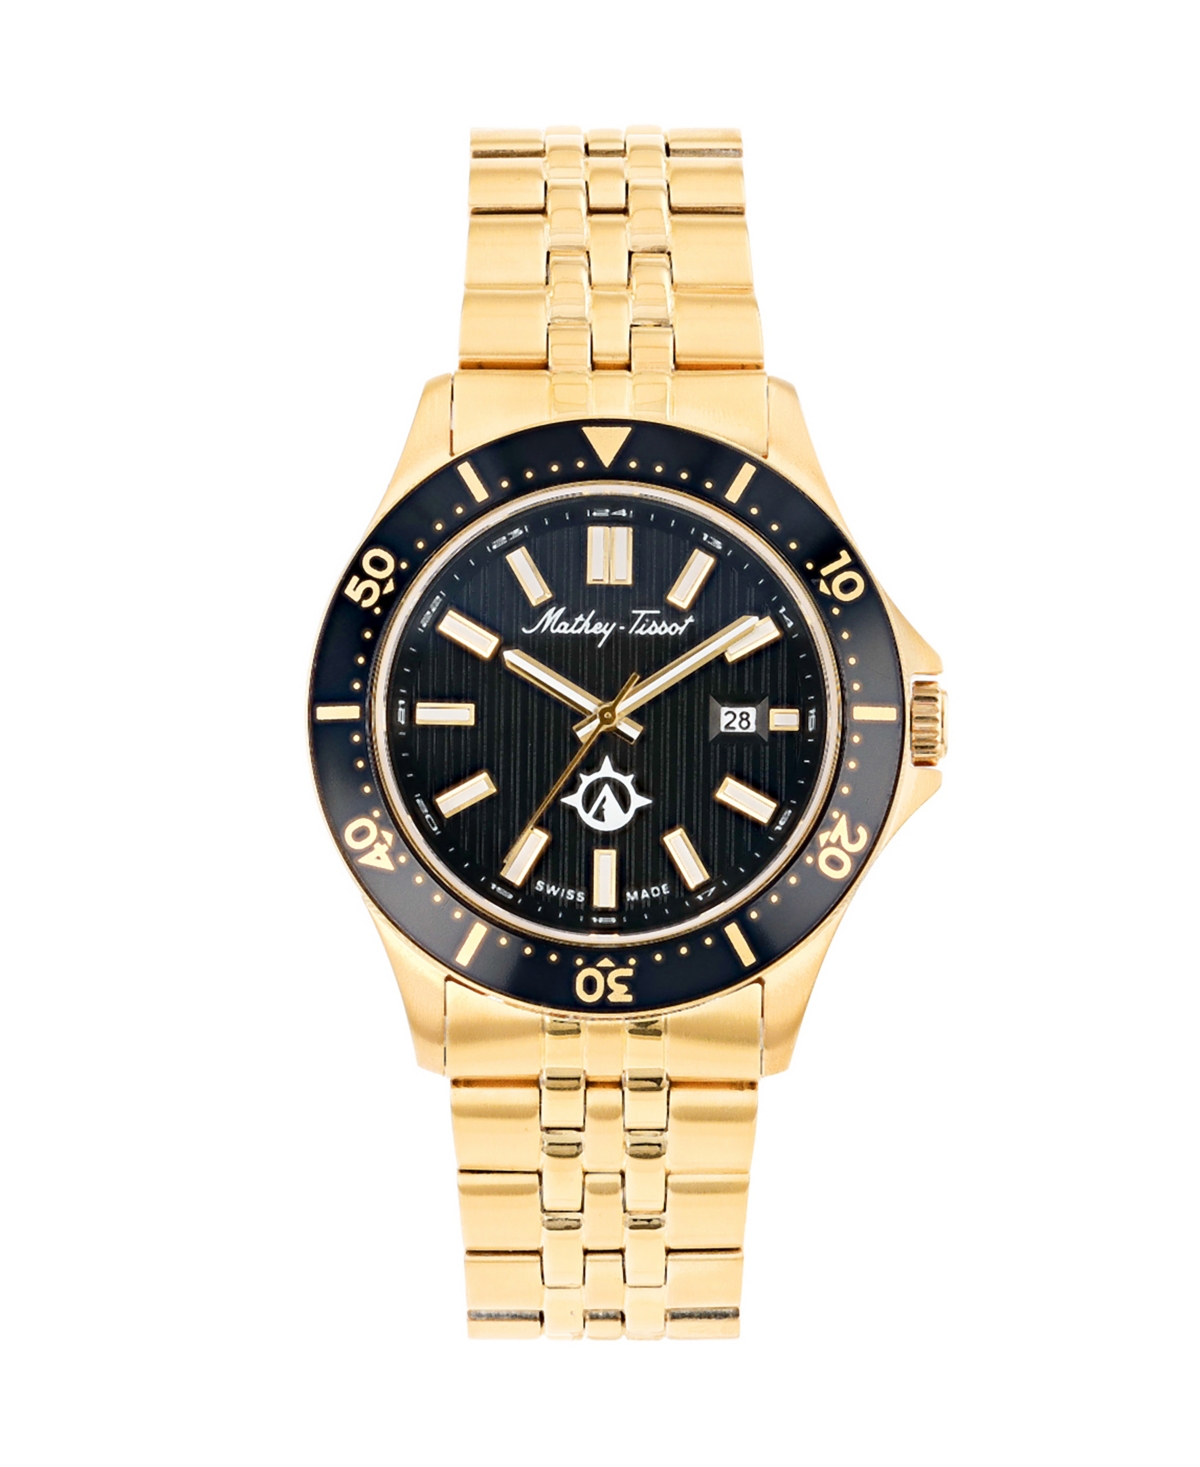 Men's Expedition Collection Three Hand Date Stainless Steel Bracelet Watch, 42mm - Gold